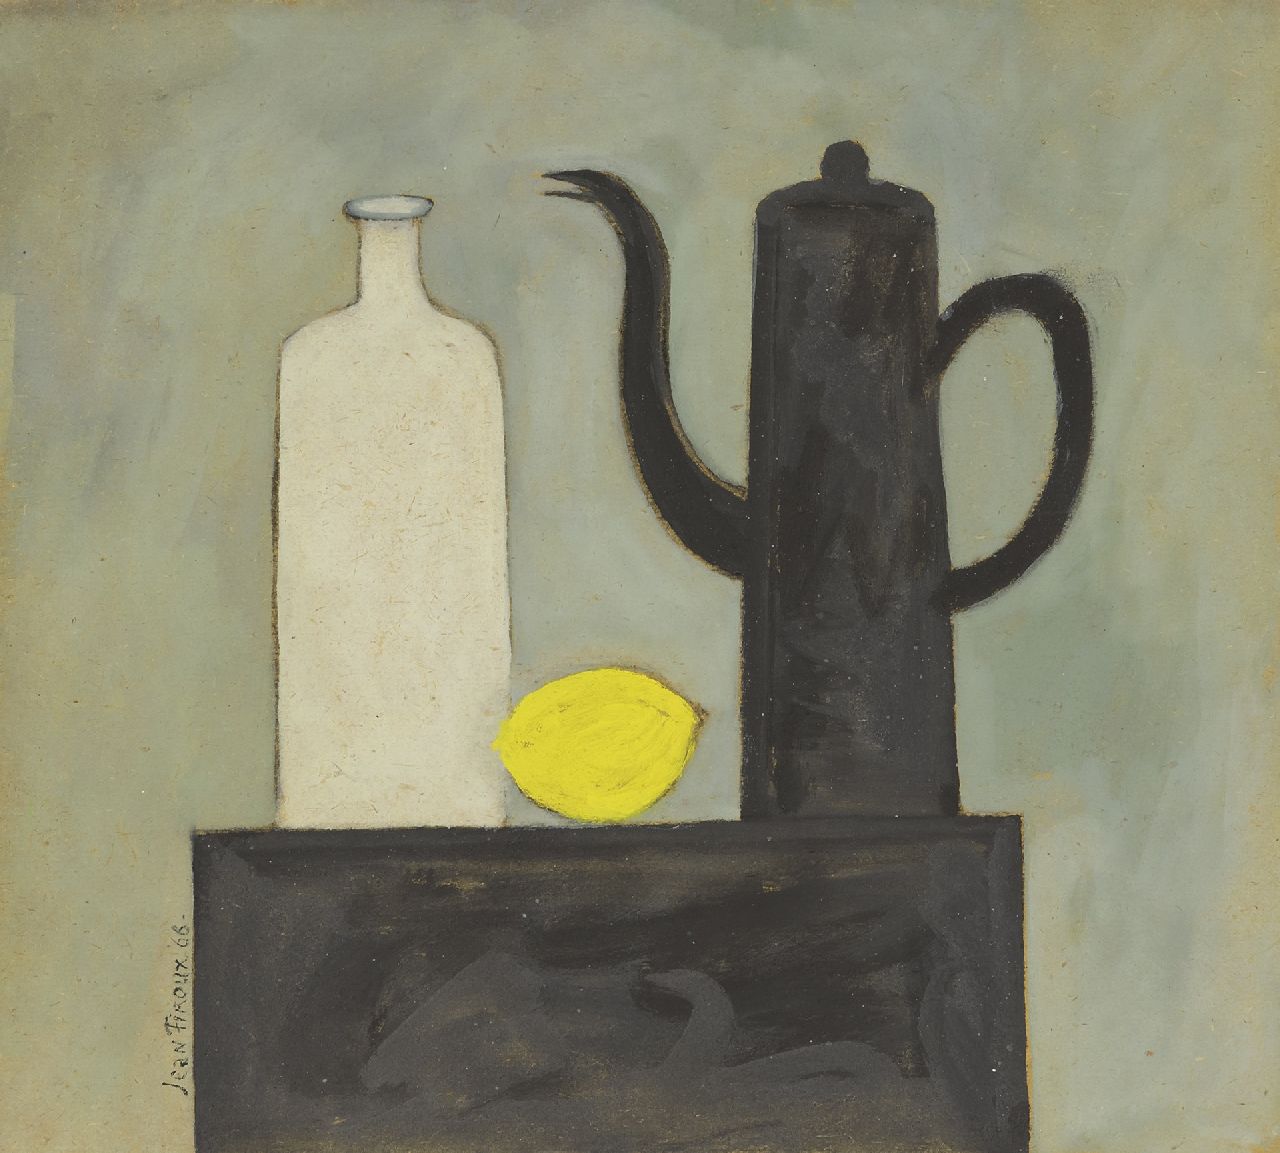 Firoux J.  | Jean Firoux, A still life with a teapot, bottle and lemon, crayon and gouache on board 31.0 x 34.4 cm, signed l.l. and dated '66